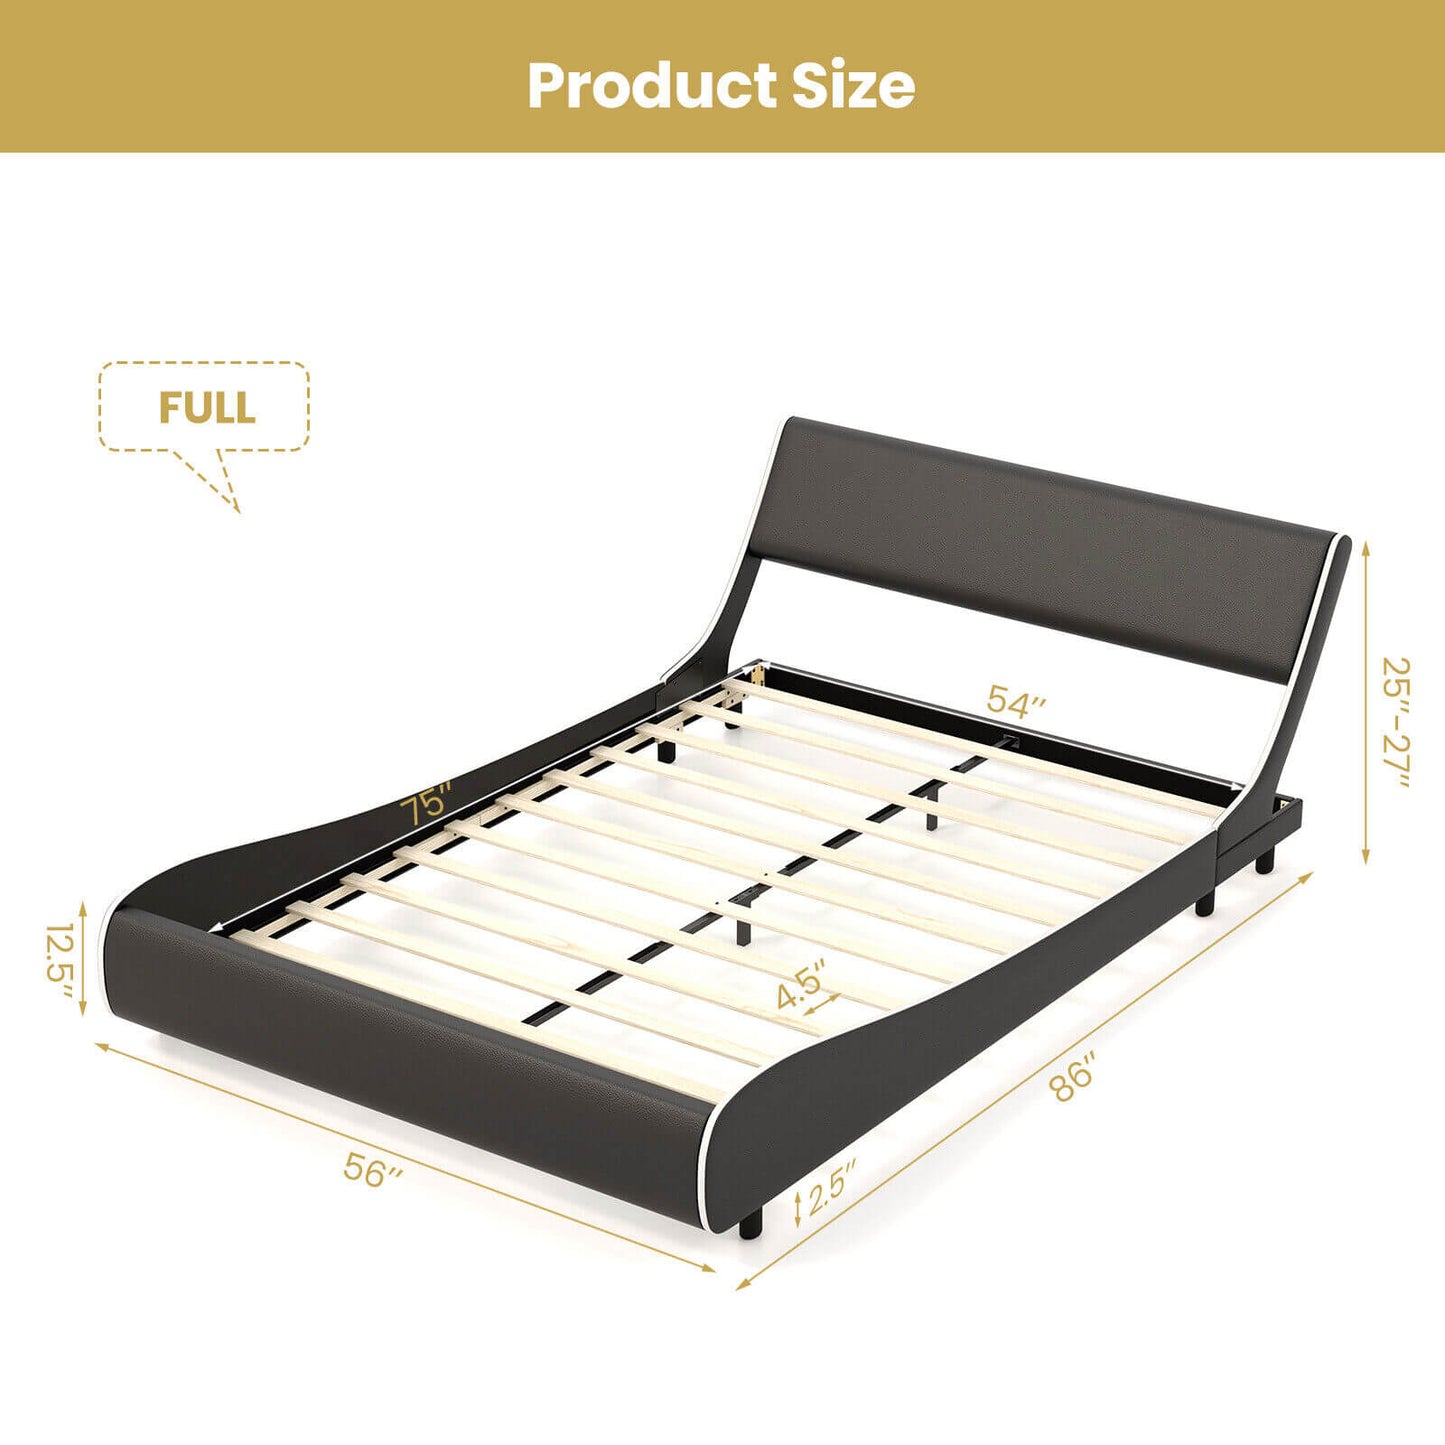 Upholstered Platform Bed Frame Low Profile Faux Leather with Curved Headboard-Full Size, Black & White